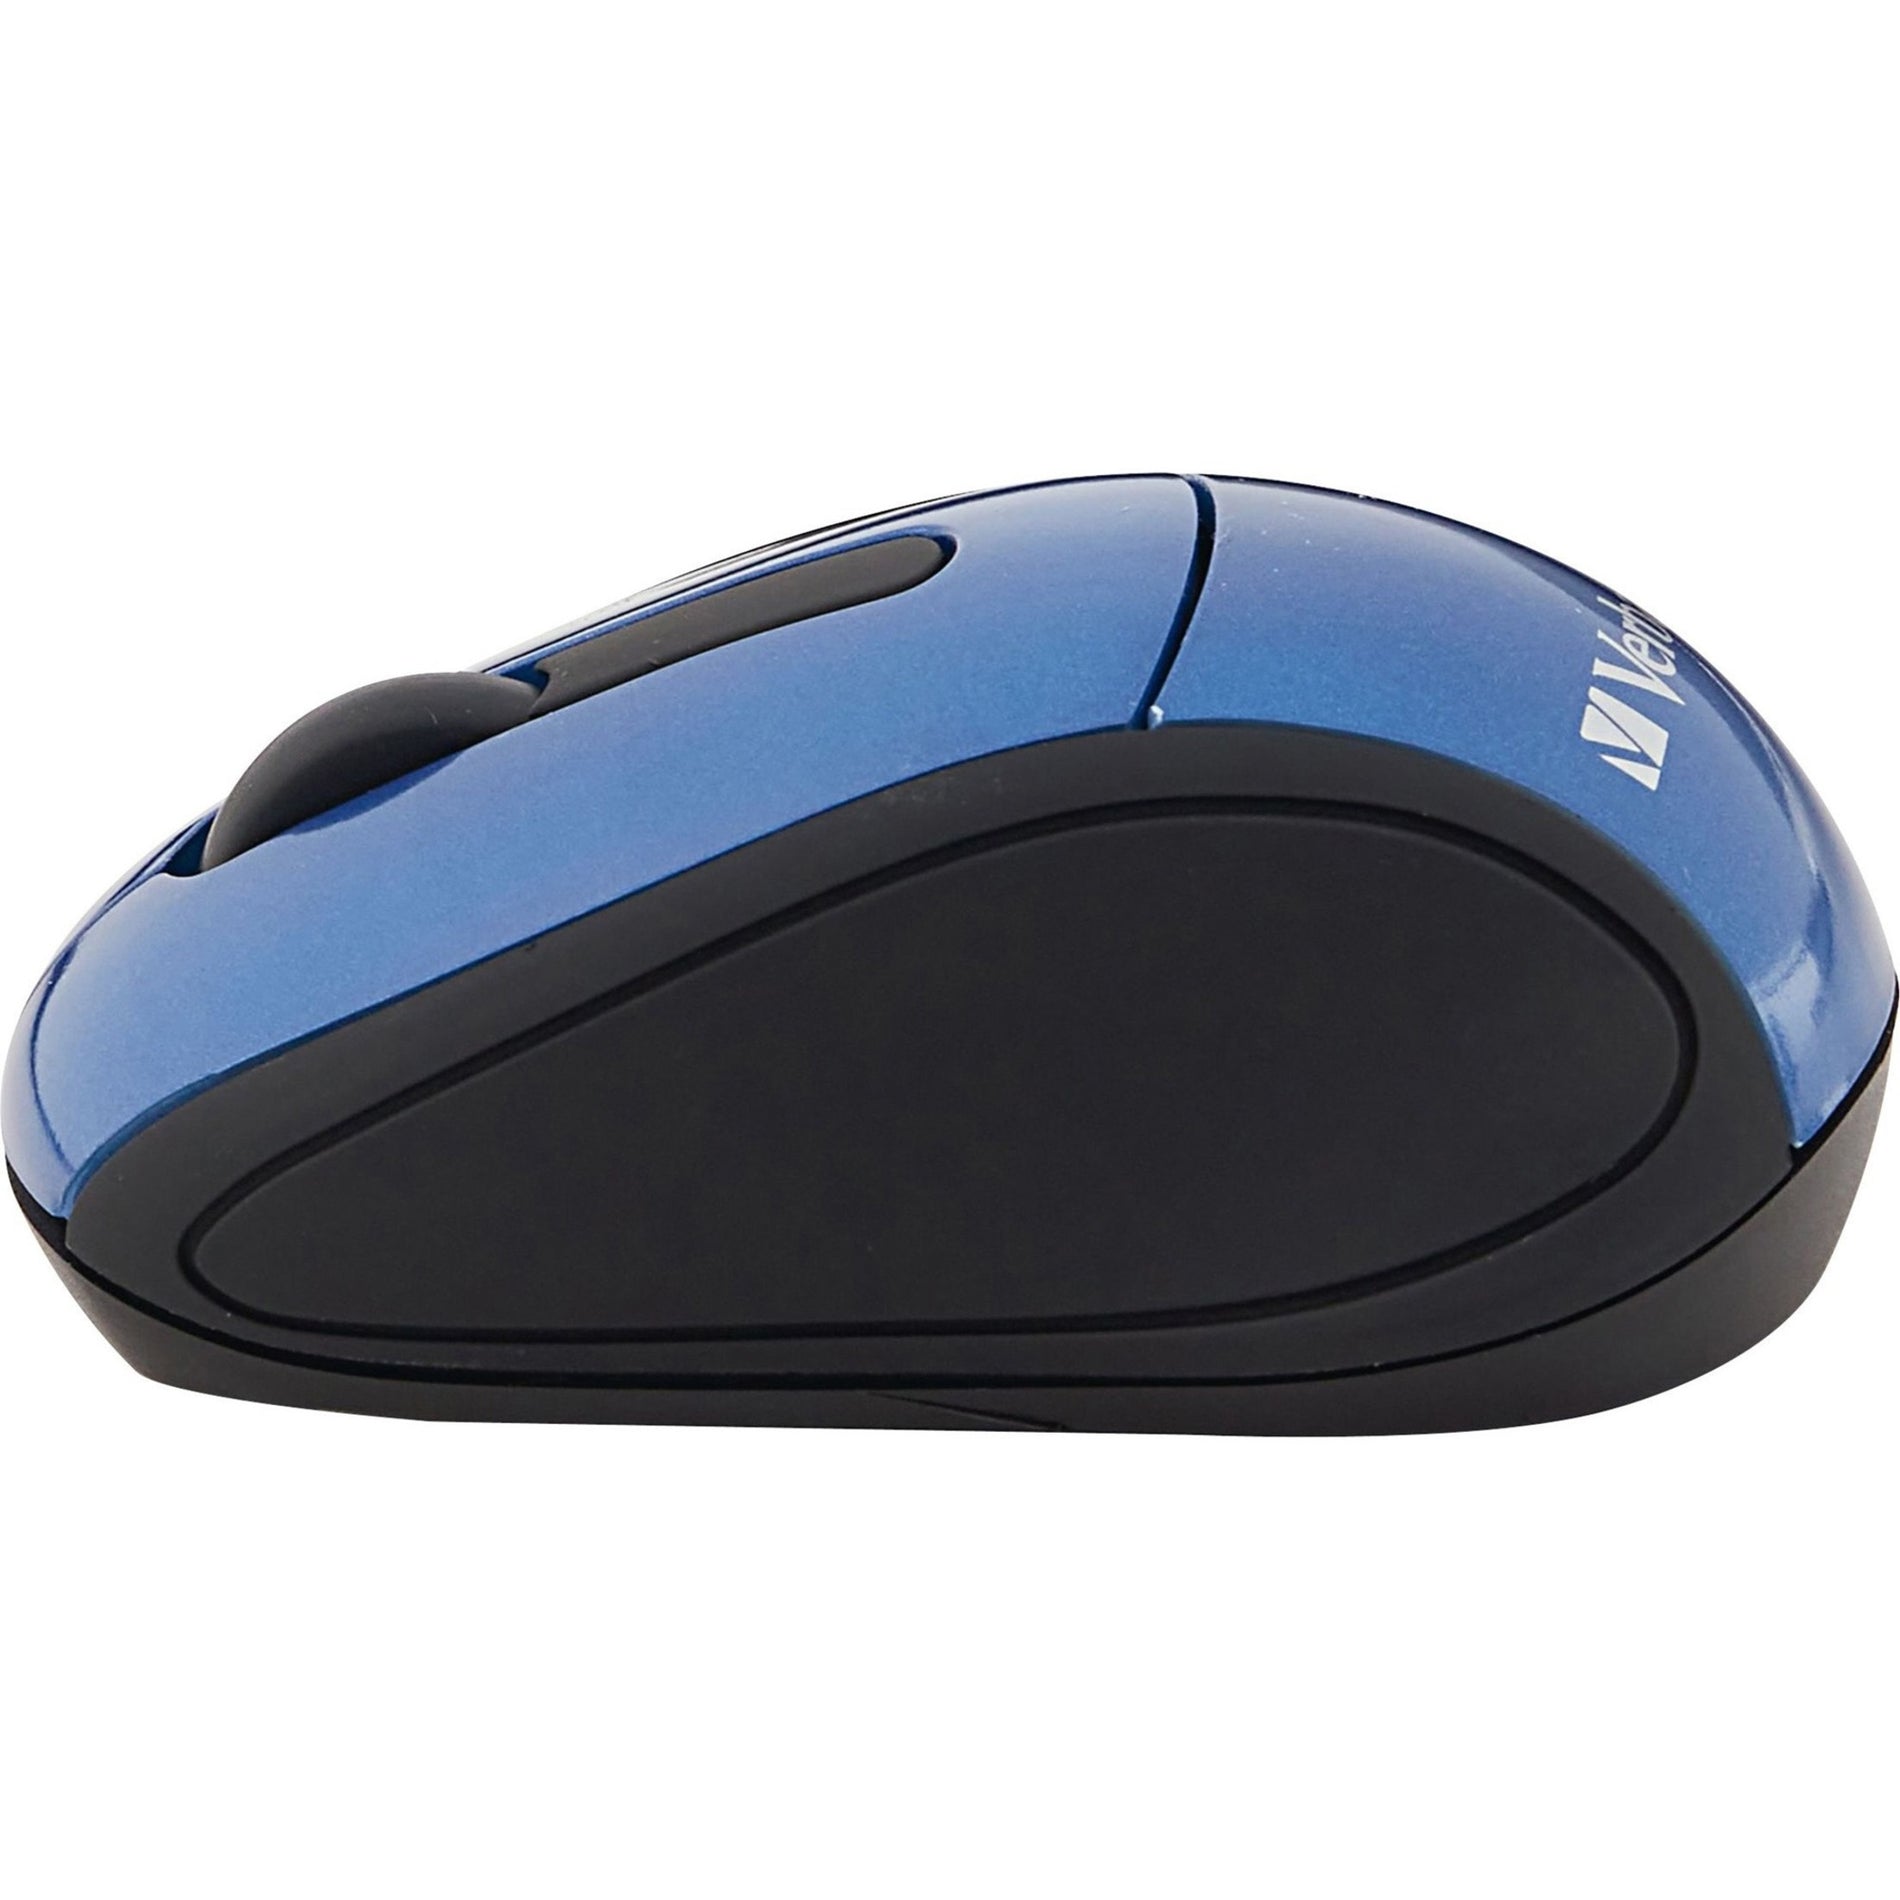 Verbatim 97471 Wireless Mini Travel Mouse, Blue - Compact and Convenient Mouse for On-the-Go Computing